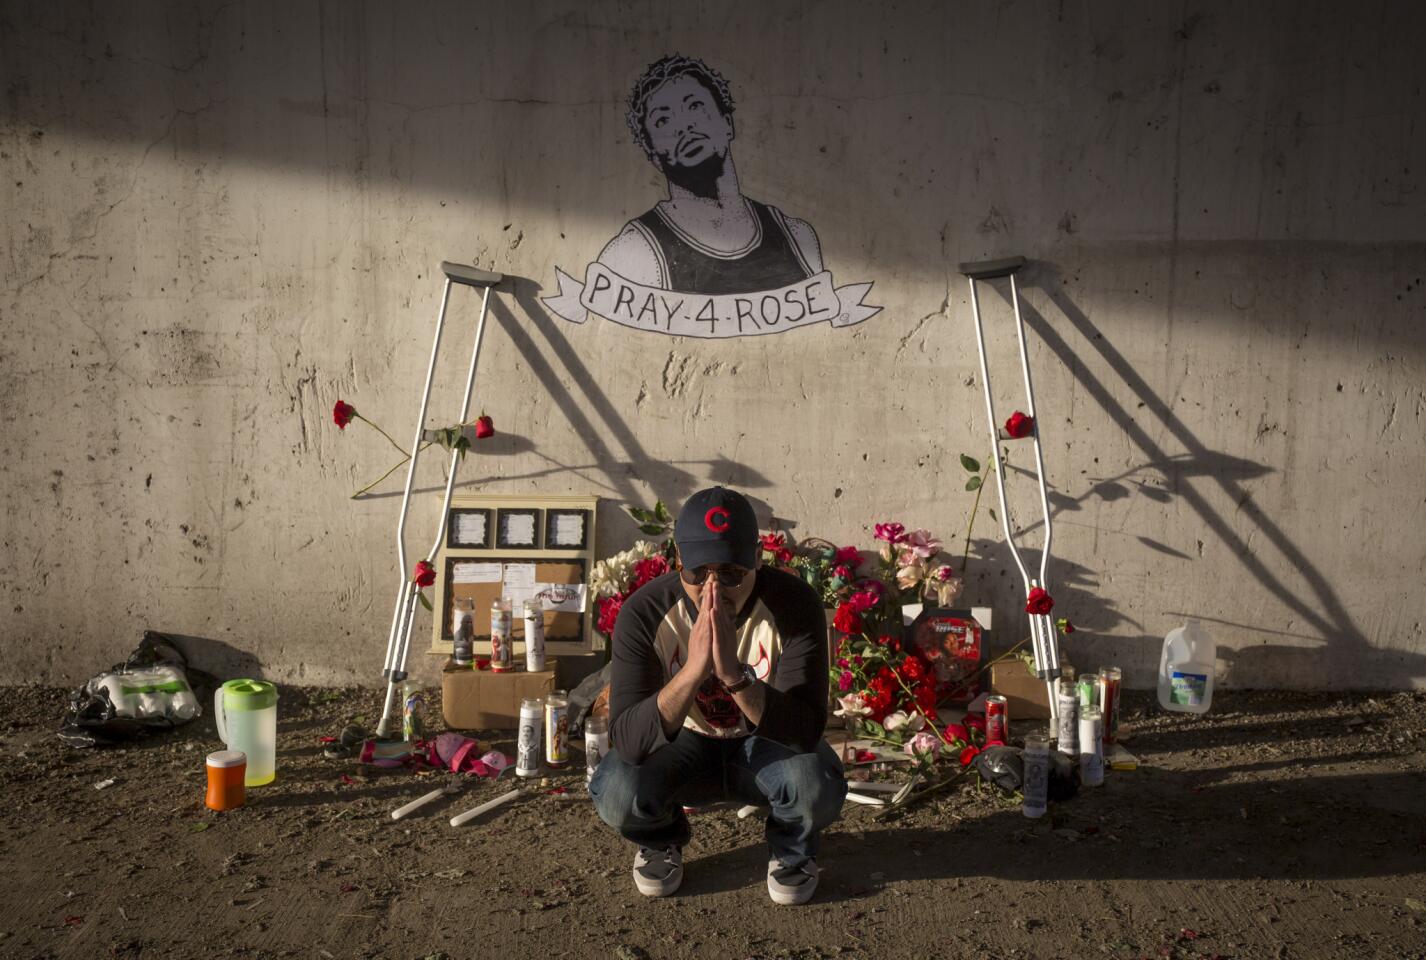 Gary Phanhdone, a fan from Denver on his way to tonight's Bulls game, poses for a friend's photo at a shrine to the injured Derrick Rose.